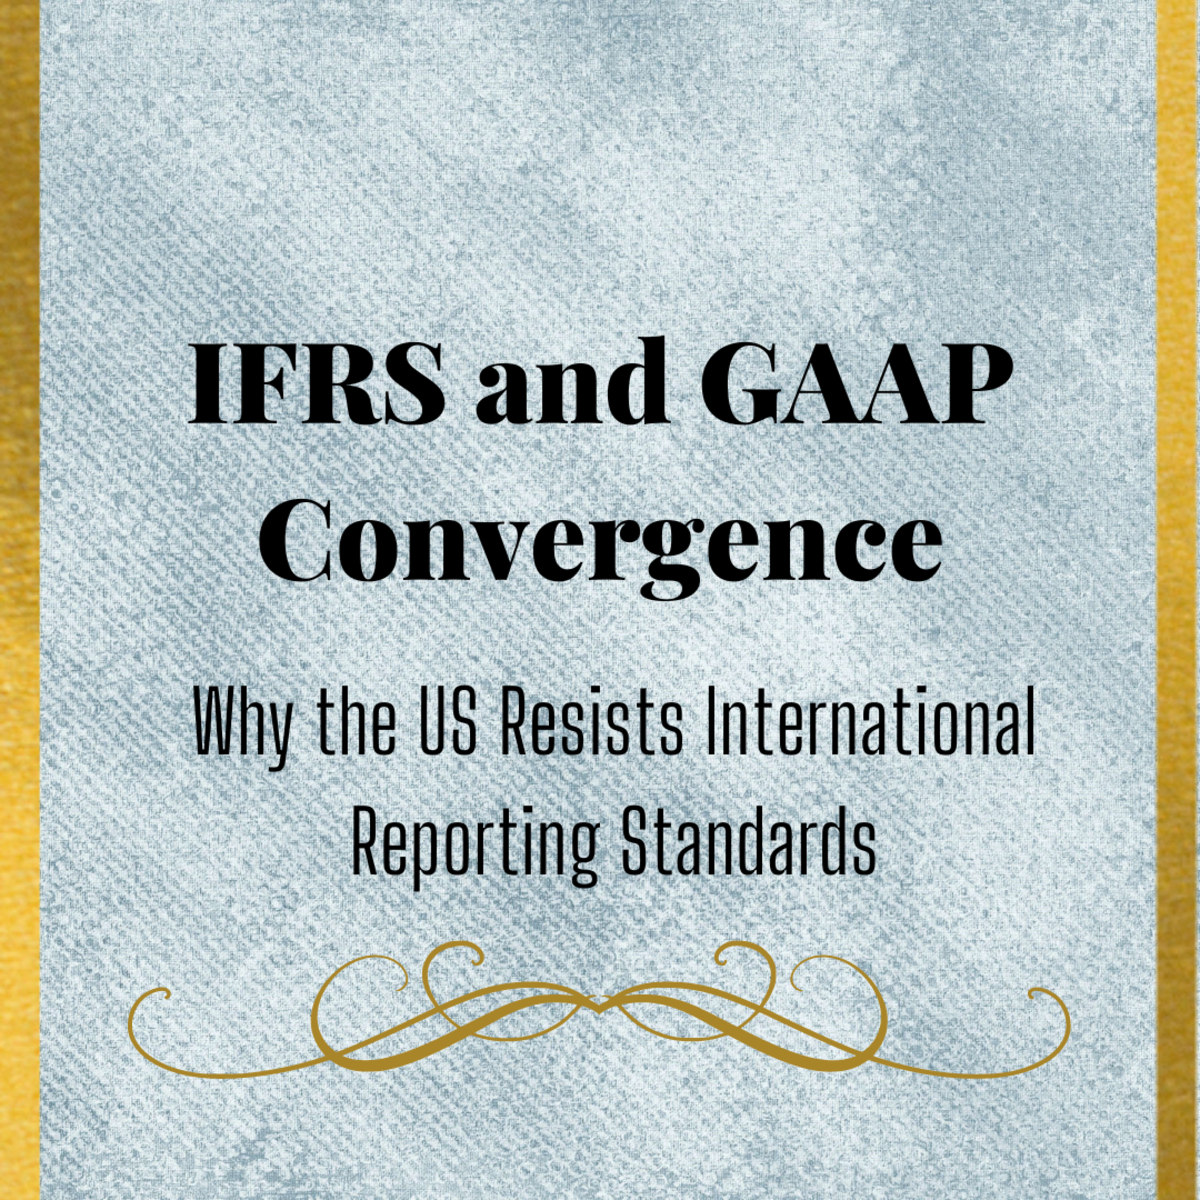 Why does the US resists international reporting standards?